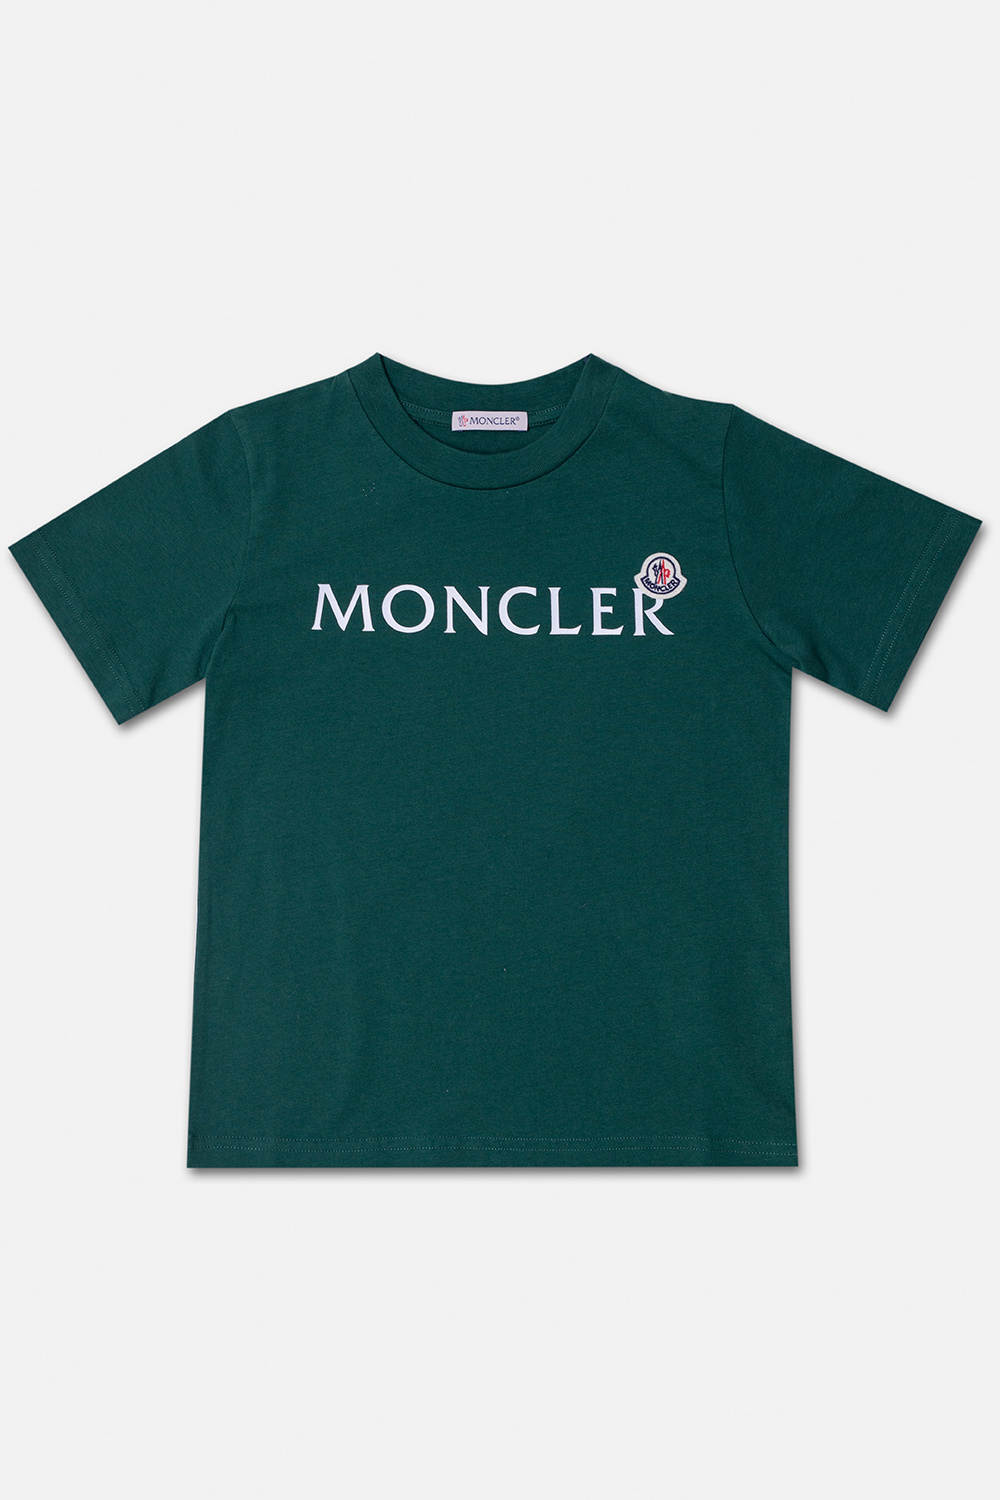 Moncler Enfant There are also sweatshirts that come with hoods